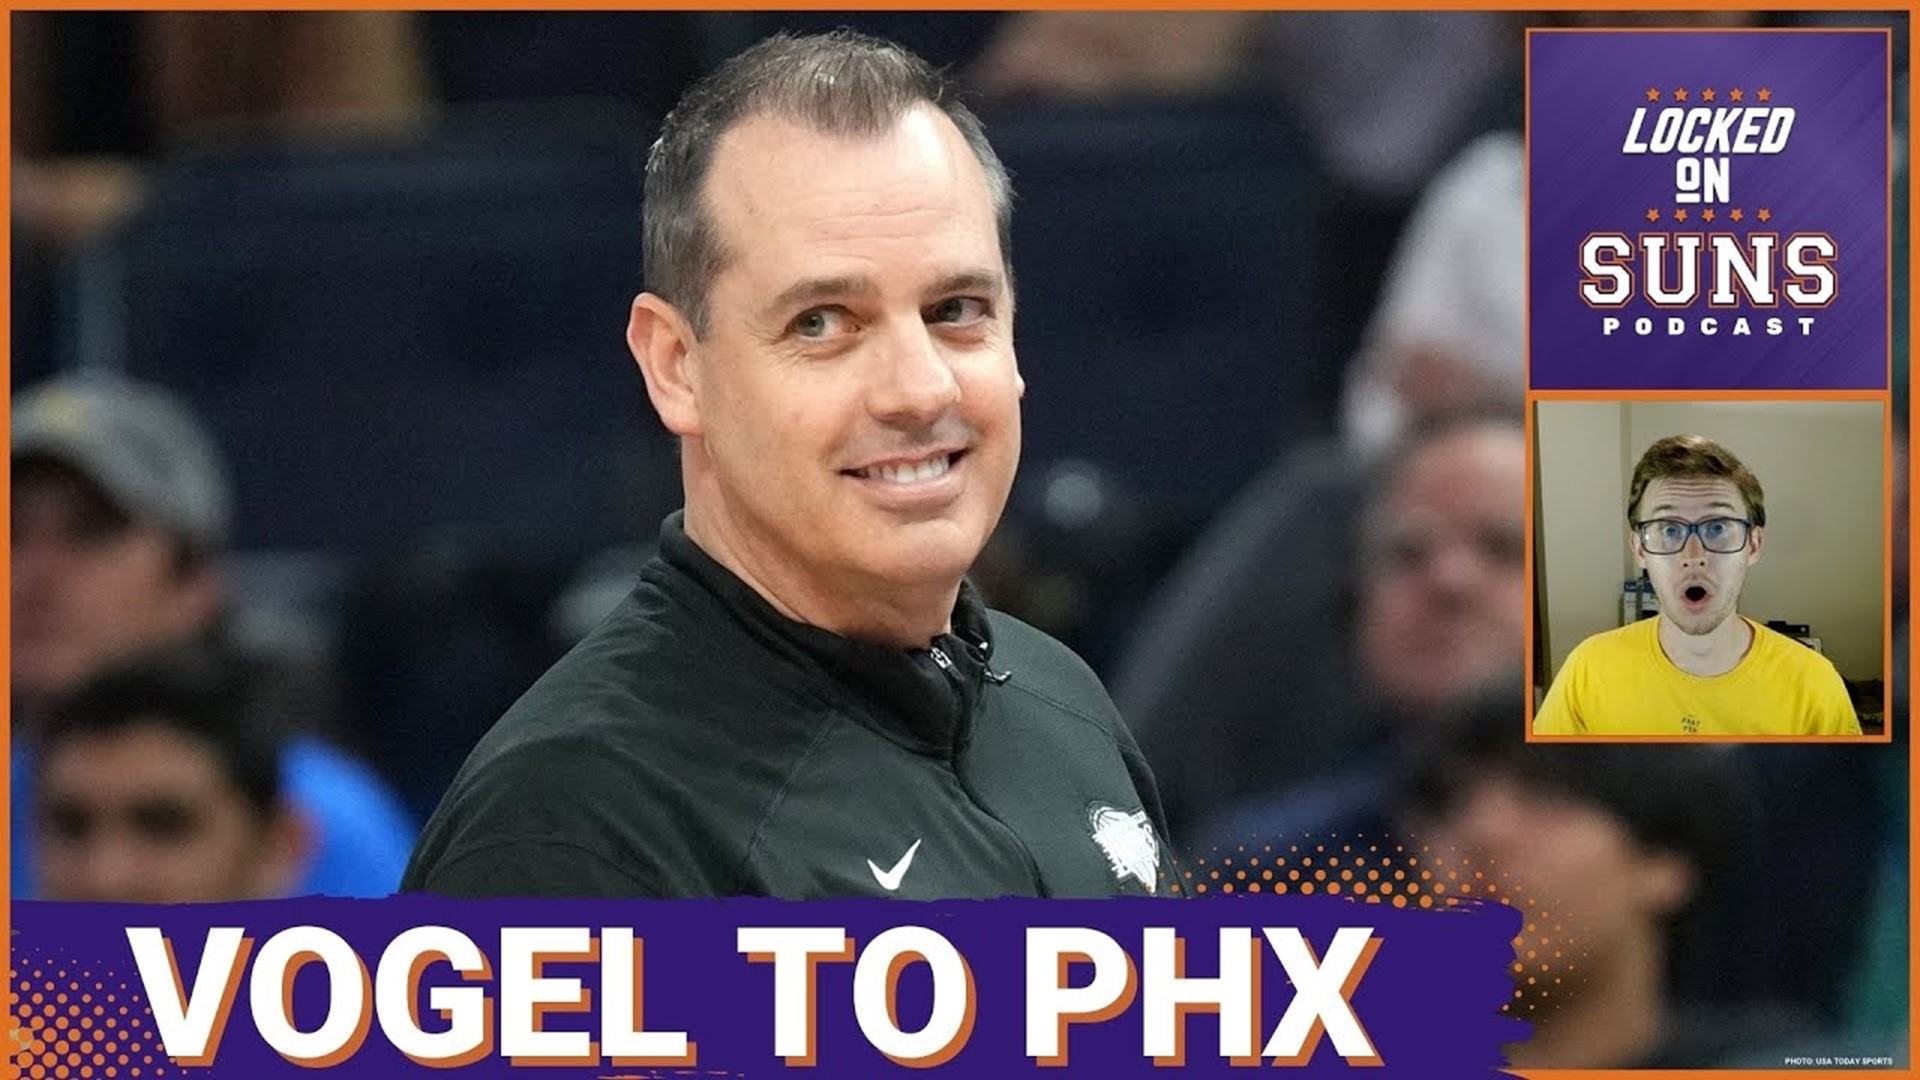 Frank Vogel will be the next Phoenix Suns head coach after a long search. Host Brendon Kleen breaks down the hire.